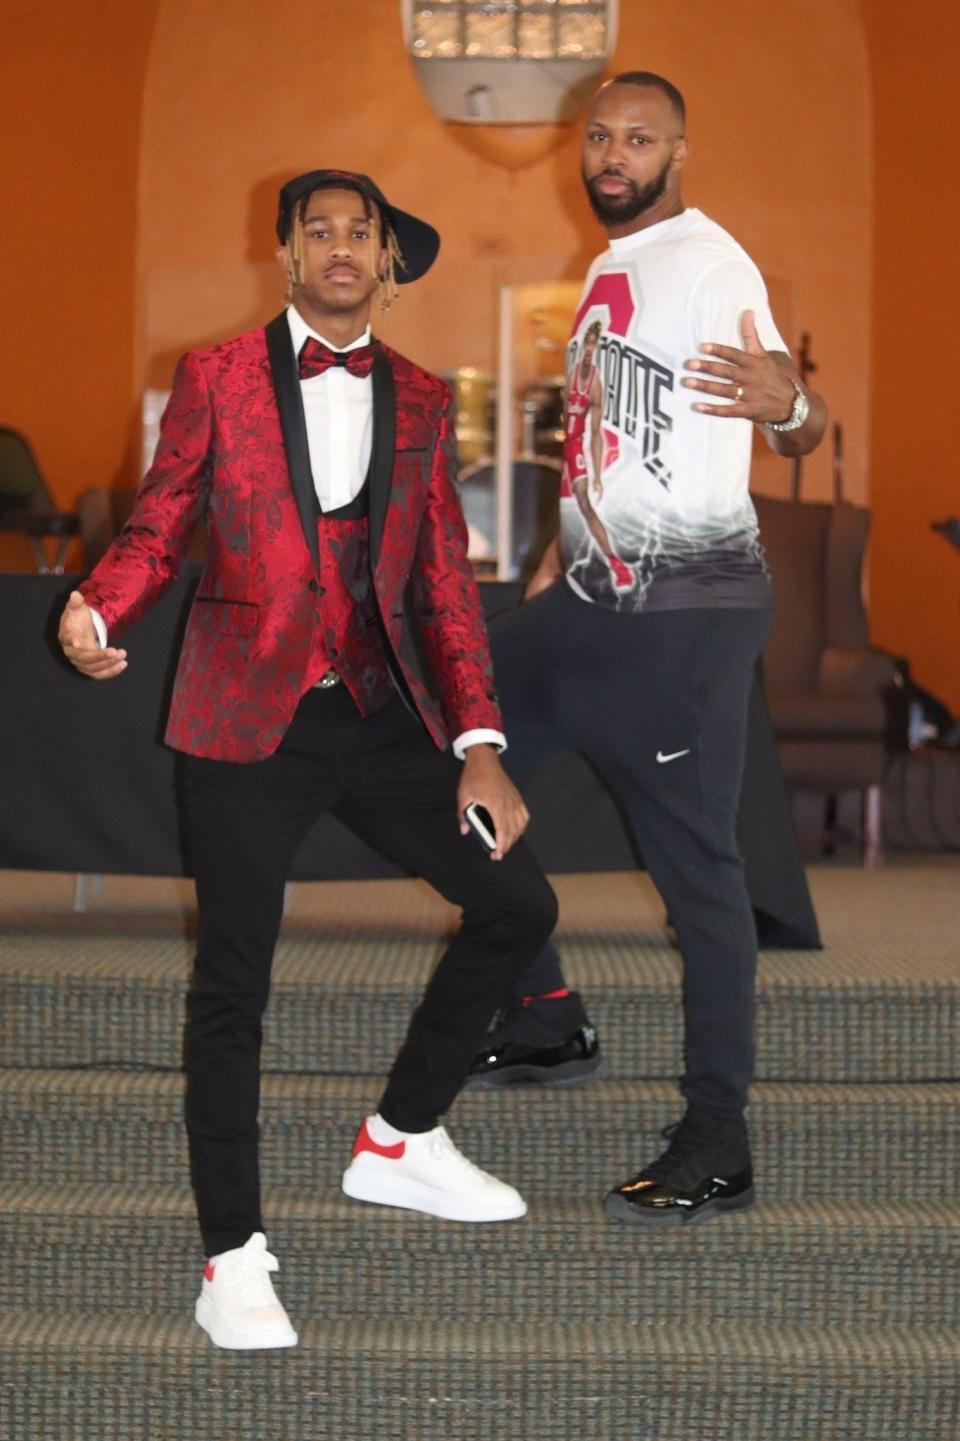 Meechie Johnson Jr. and Meechie Johnson Sr. celebrate the son signing to play for Ohio State. When Johnson Jr. was born, his dad put his basketball career on hold to focus on being a father first.